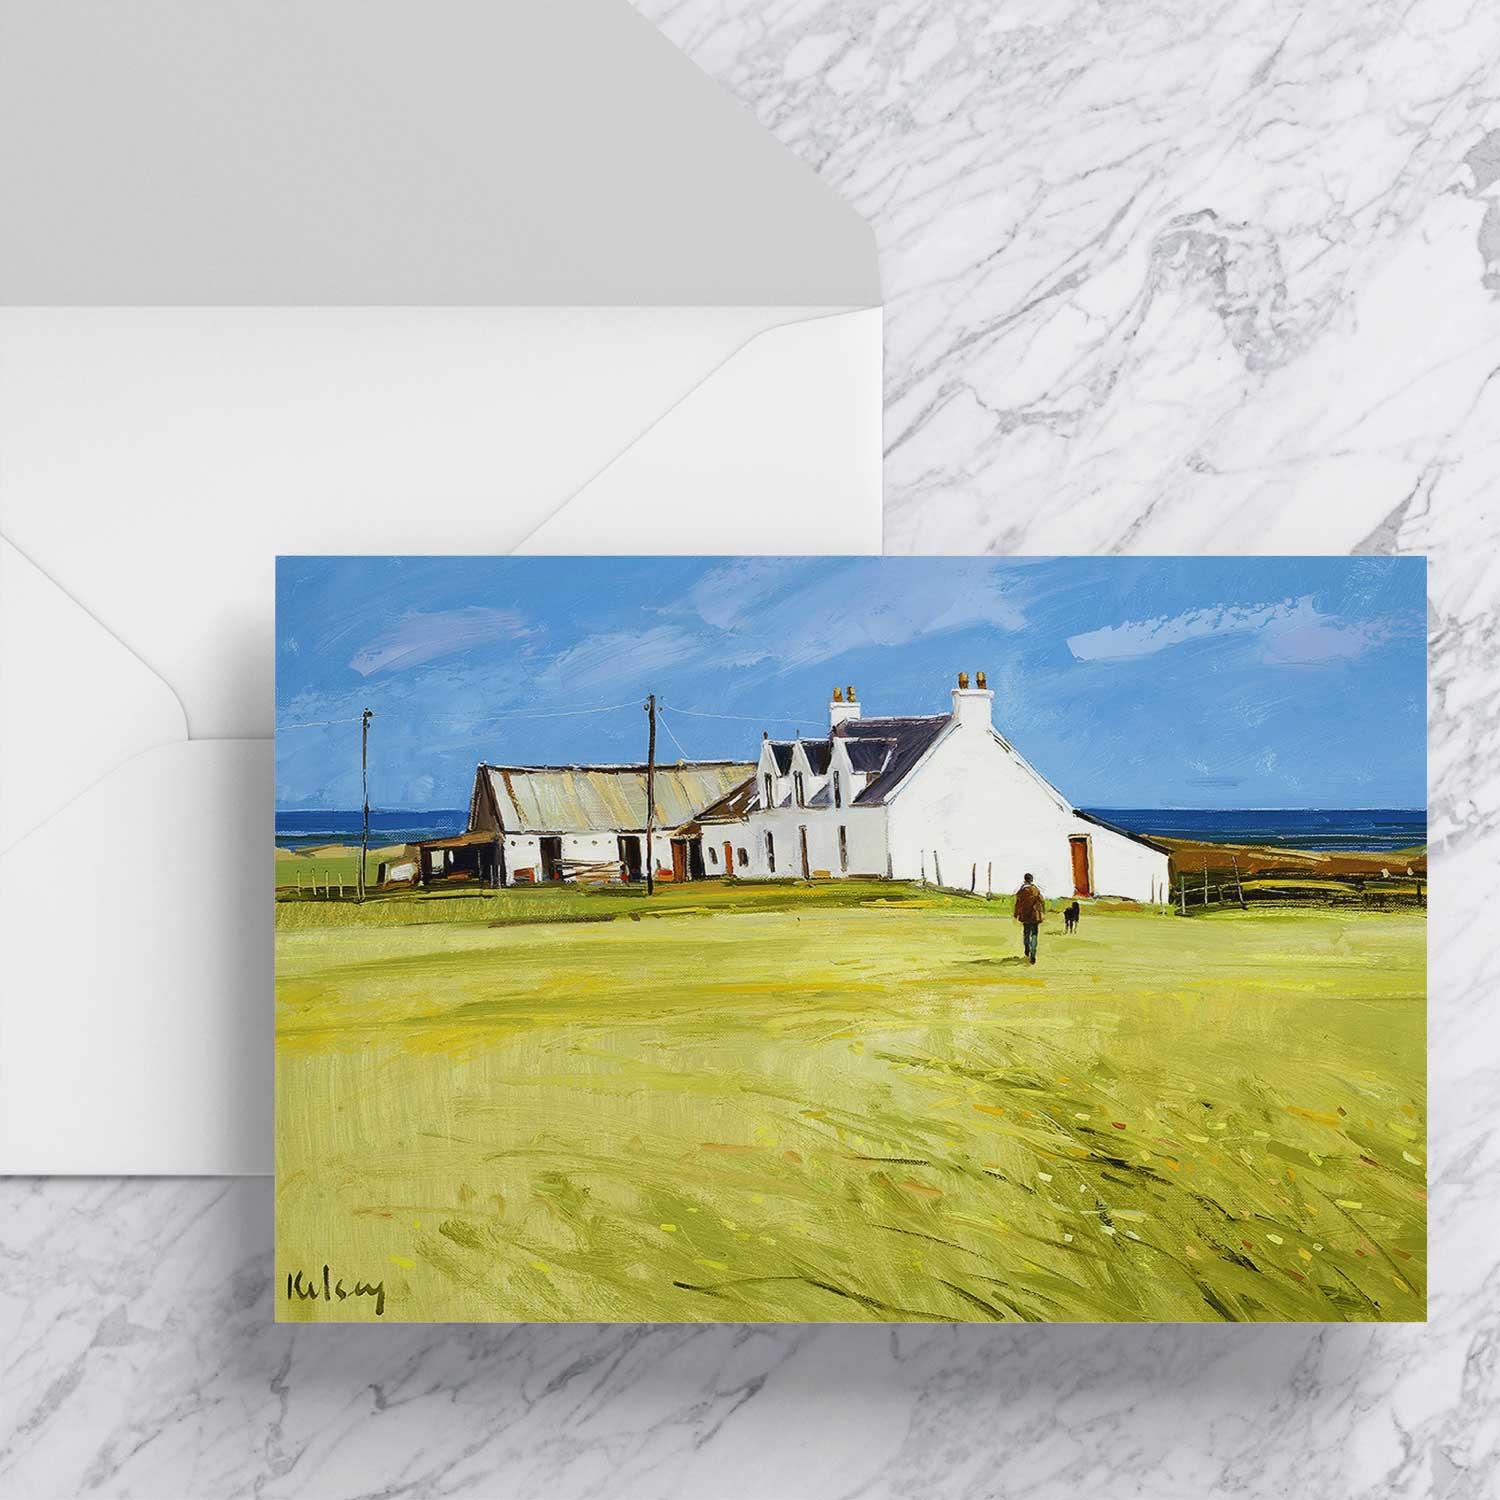 Cottages Iona Greeting Card from an original painting by artist Robert Kelsey